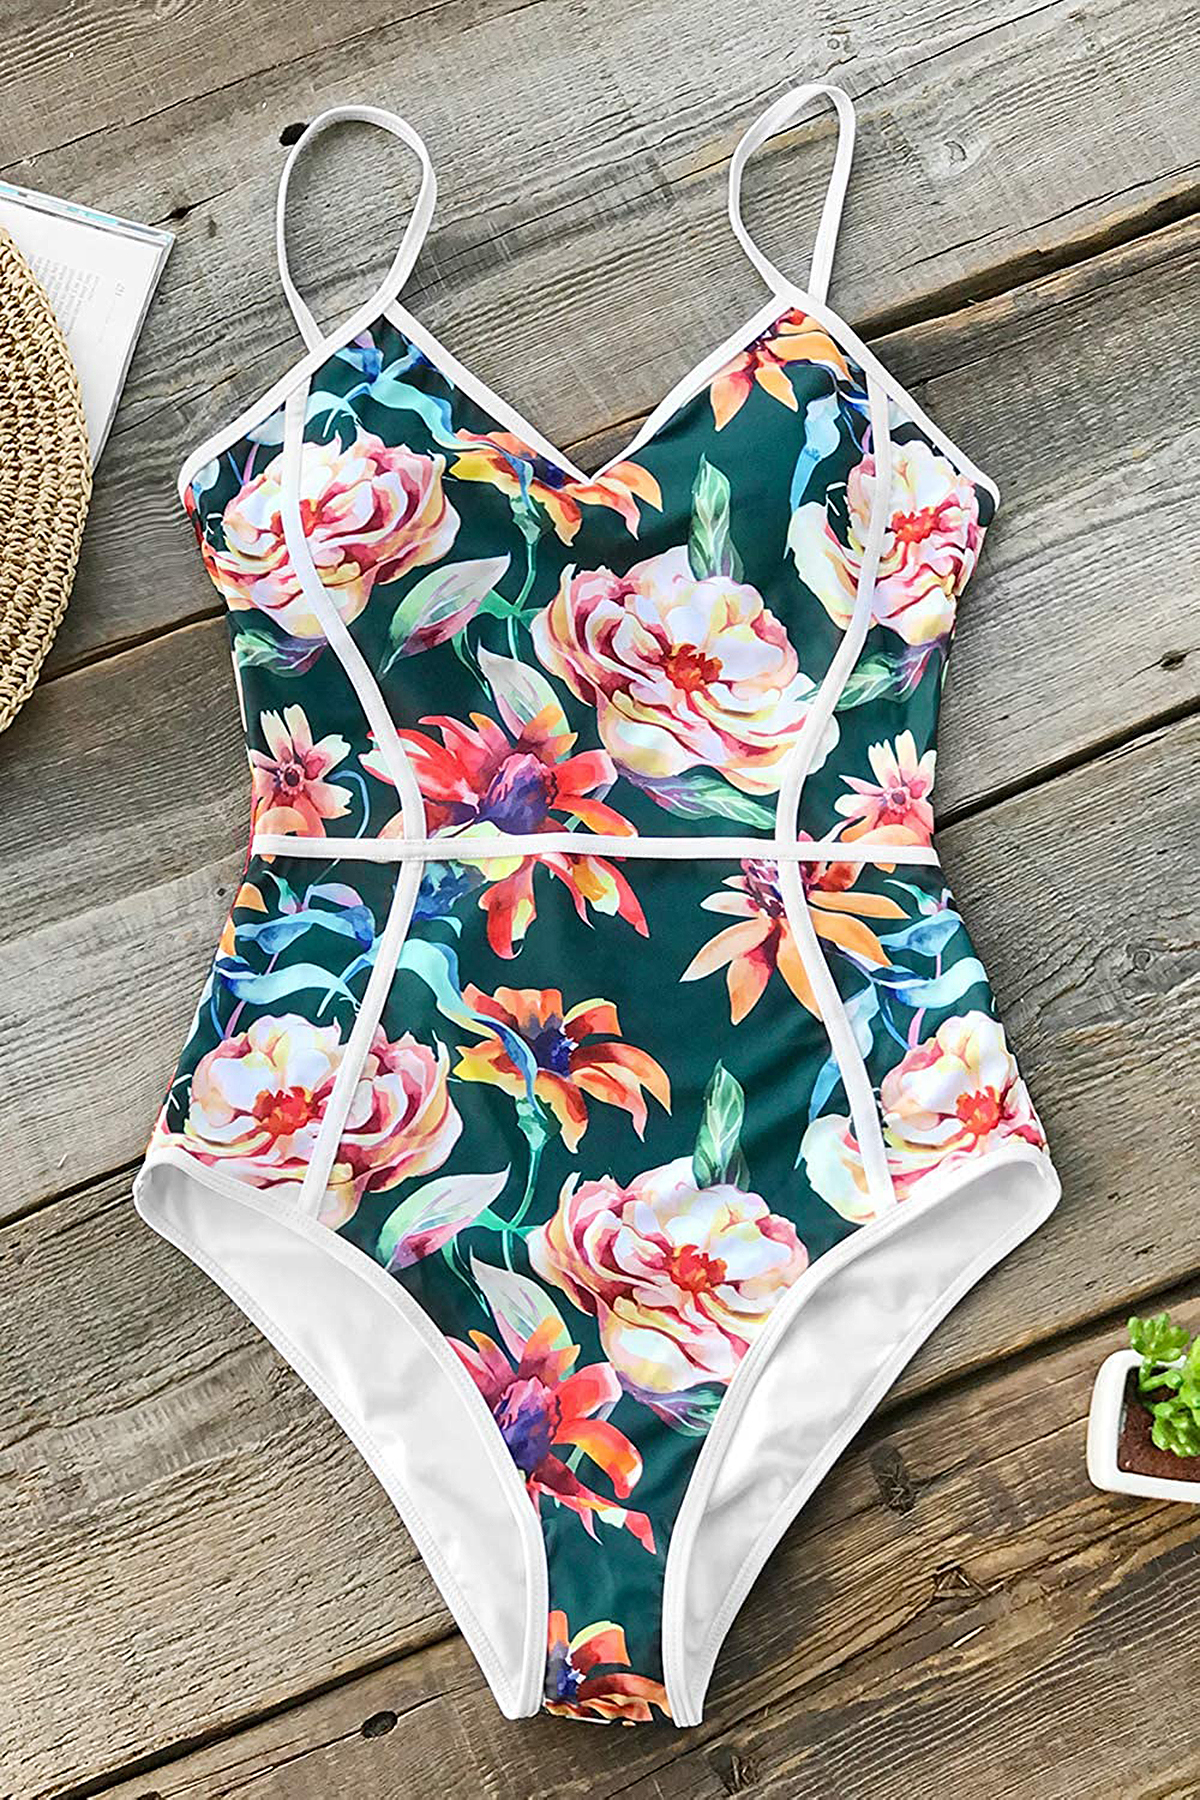 One-Piece Swimsuits: 5 Flattering Picks to Stun in This Summer